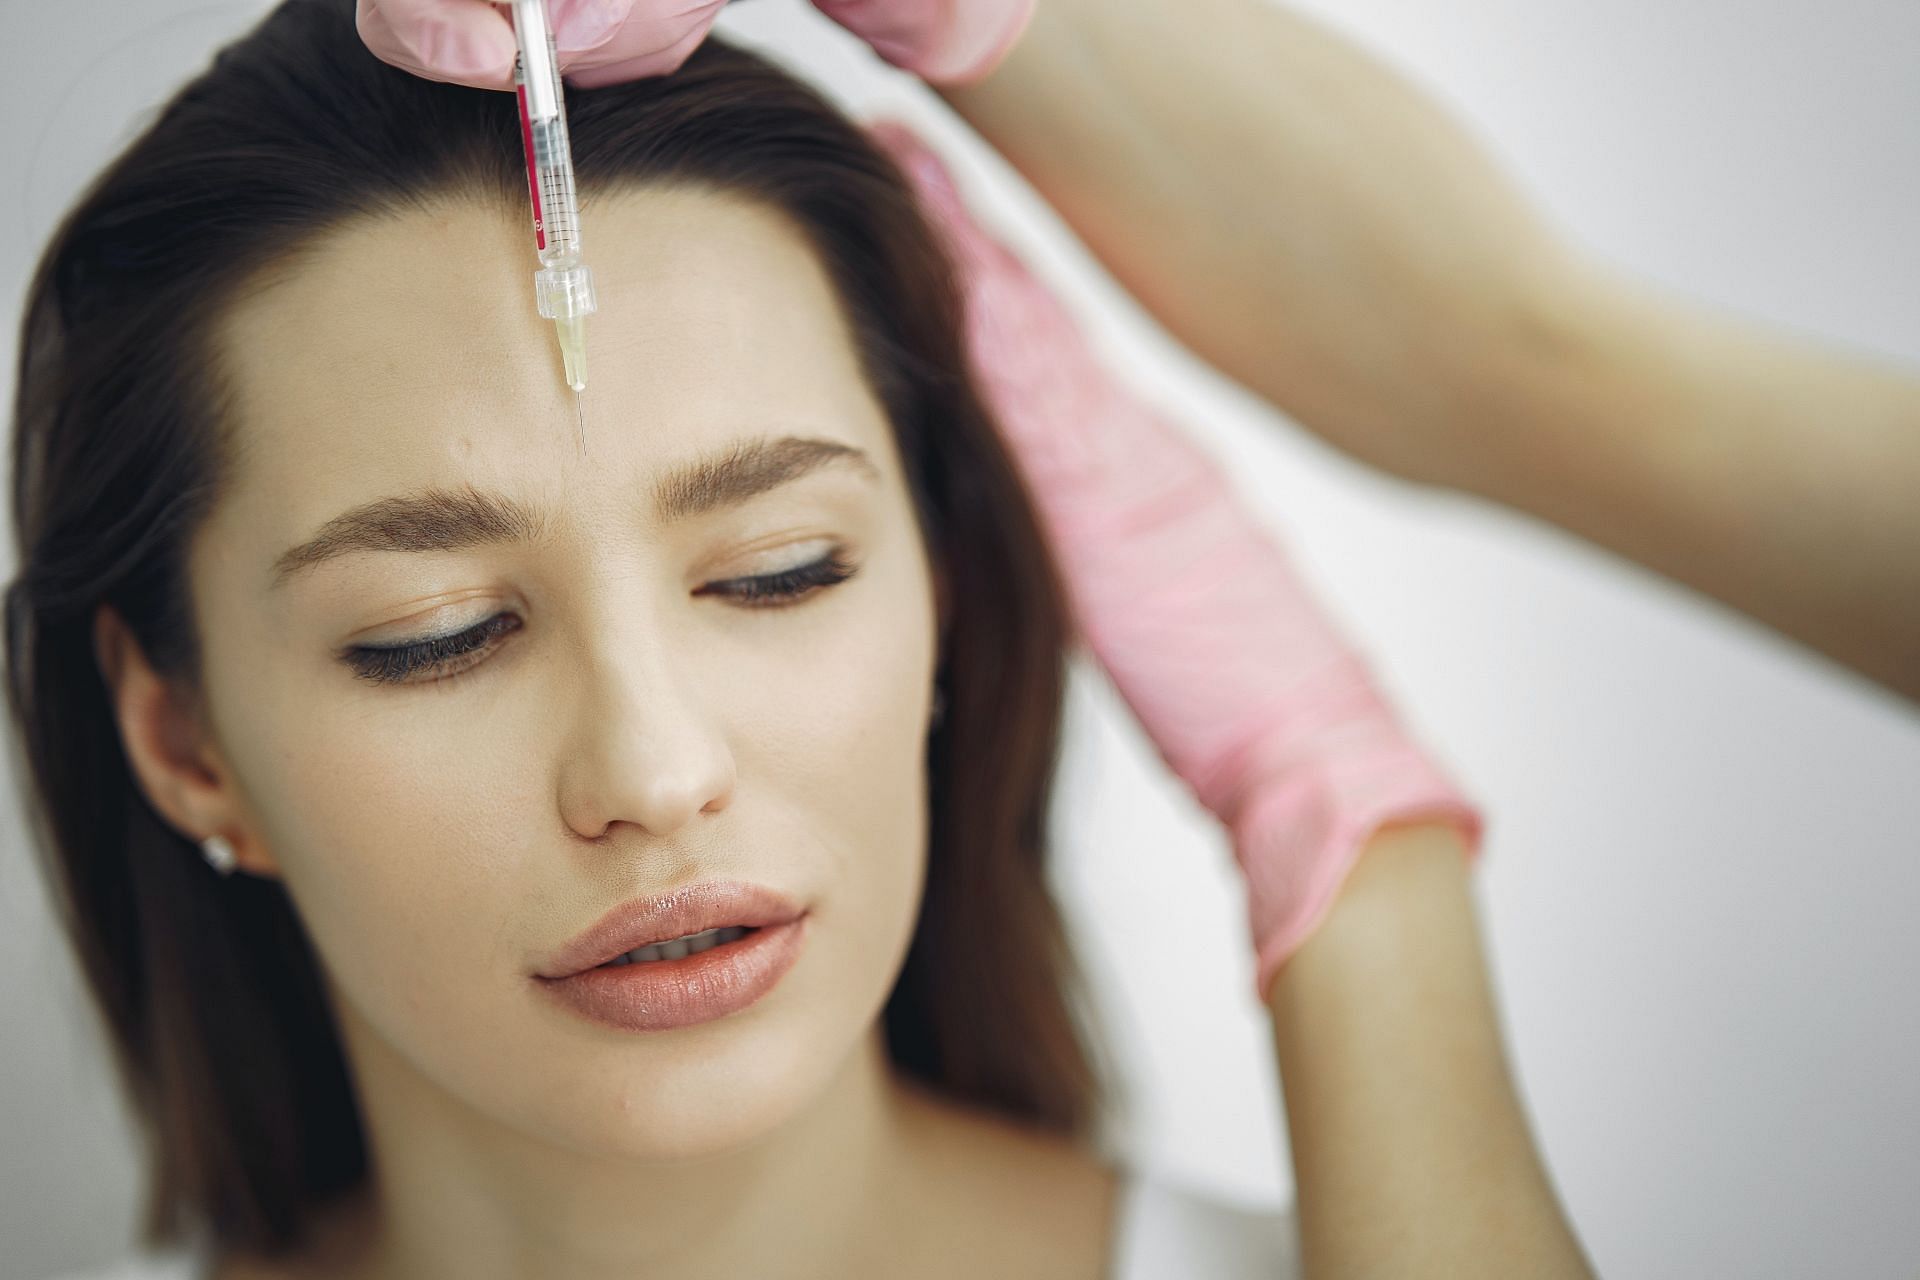 Botox is used for cosmetic as well as medical purpose. (Image via Pexels/ Gustavo Fring)